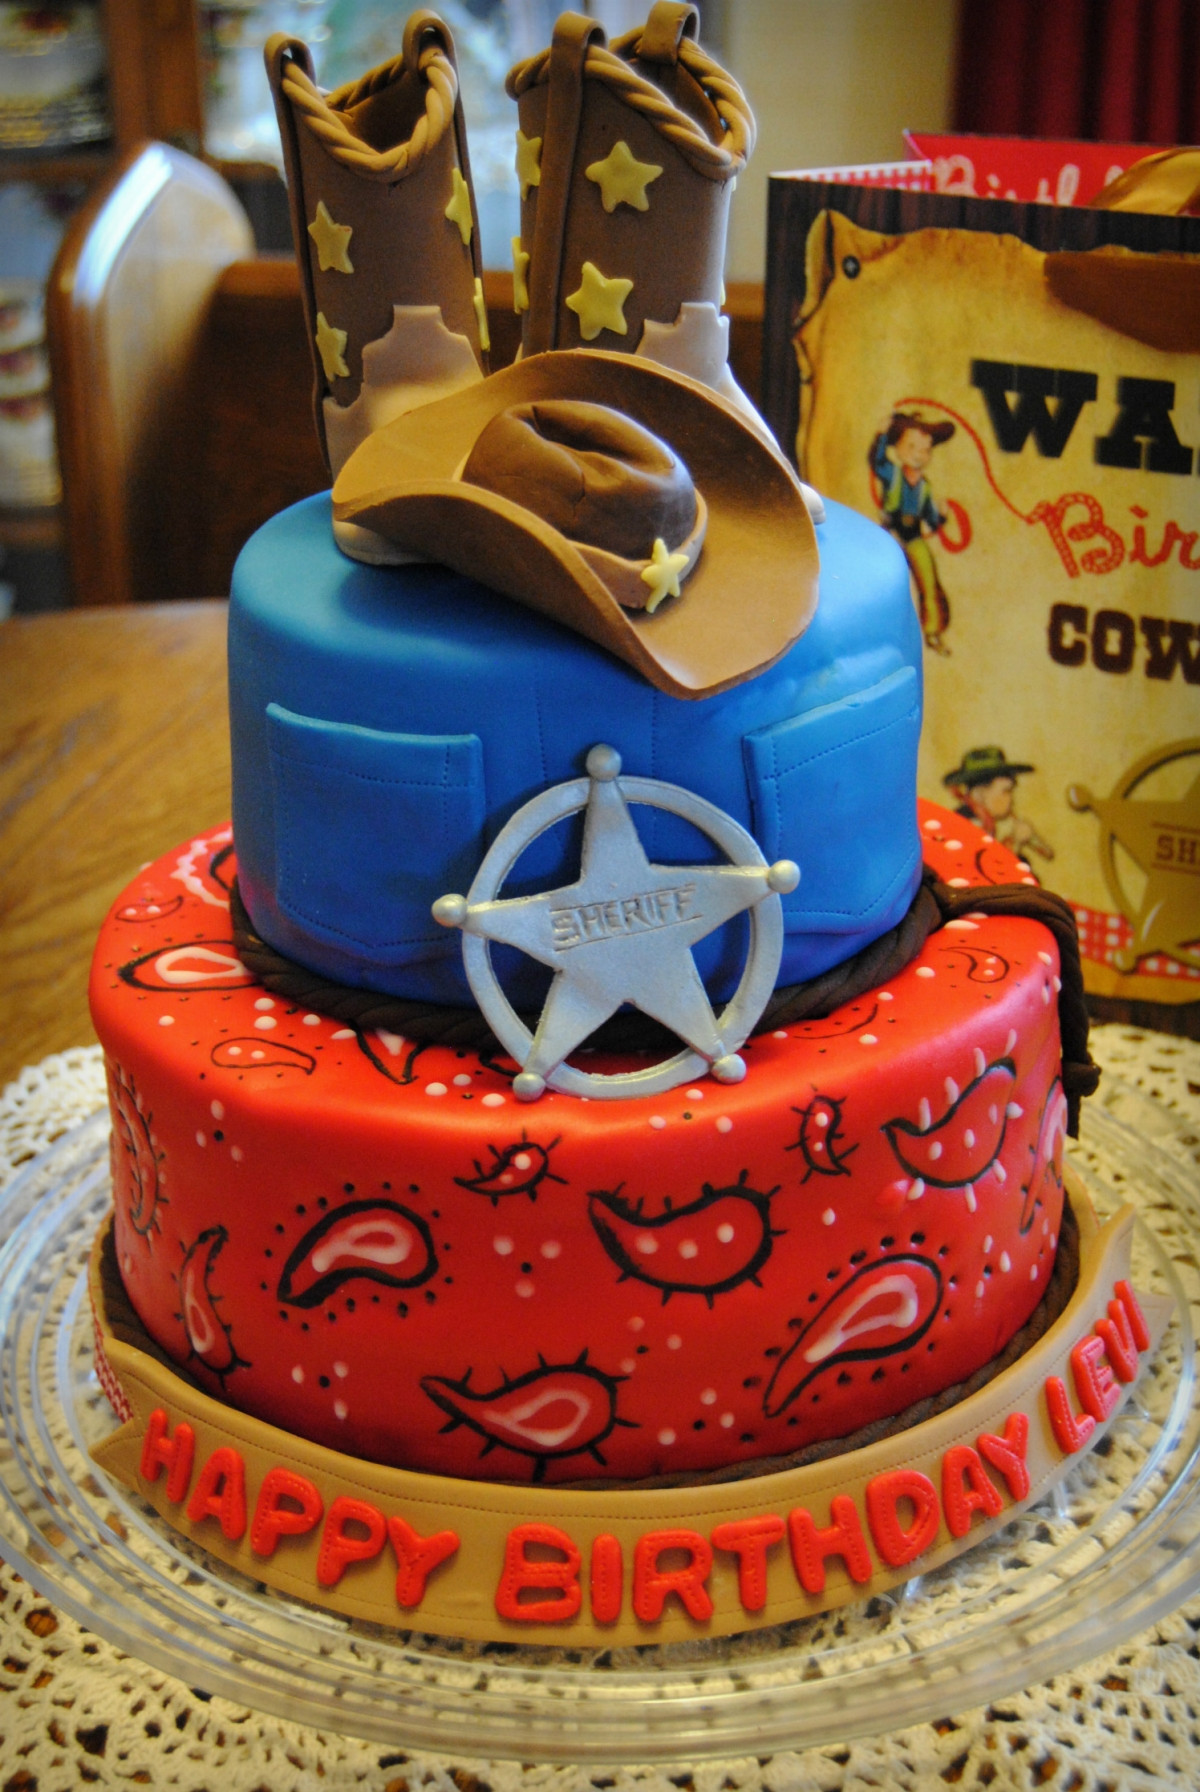 Cowboy Birthday Cakes
 1000 images about cowboy cakes on Pinterest